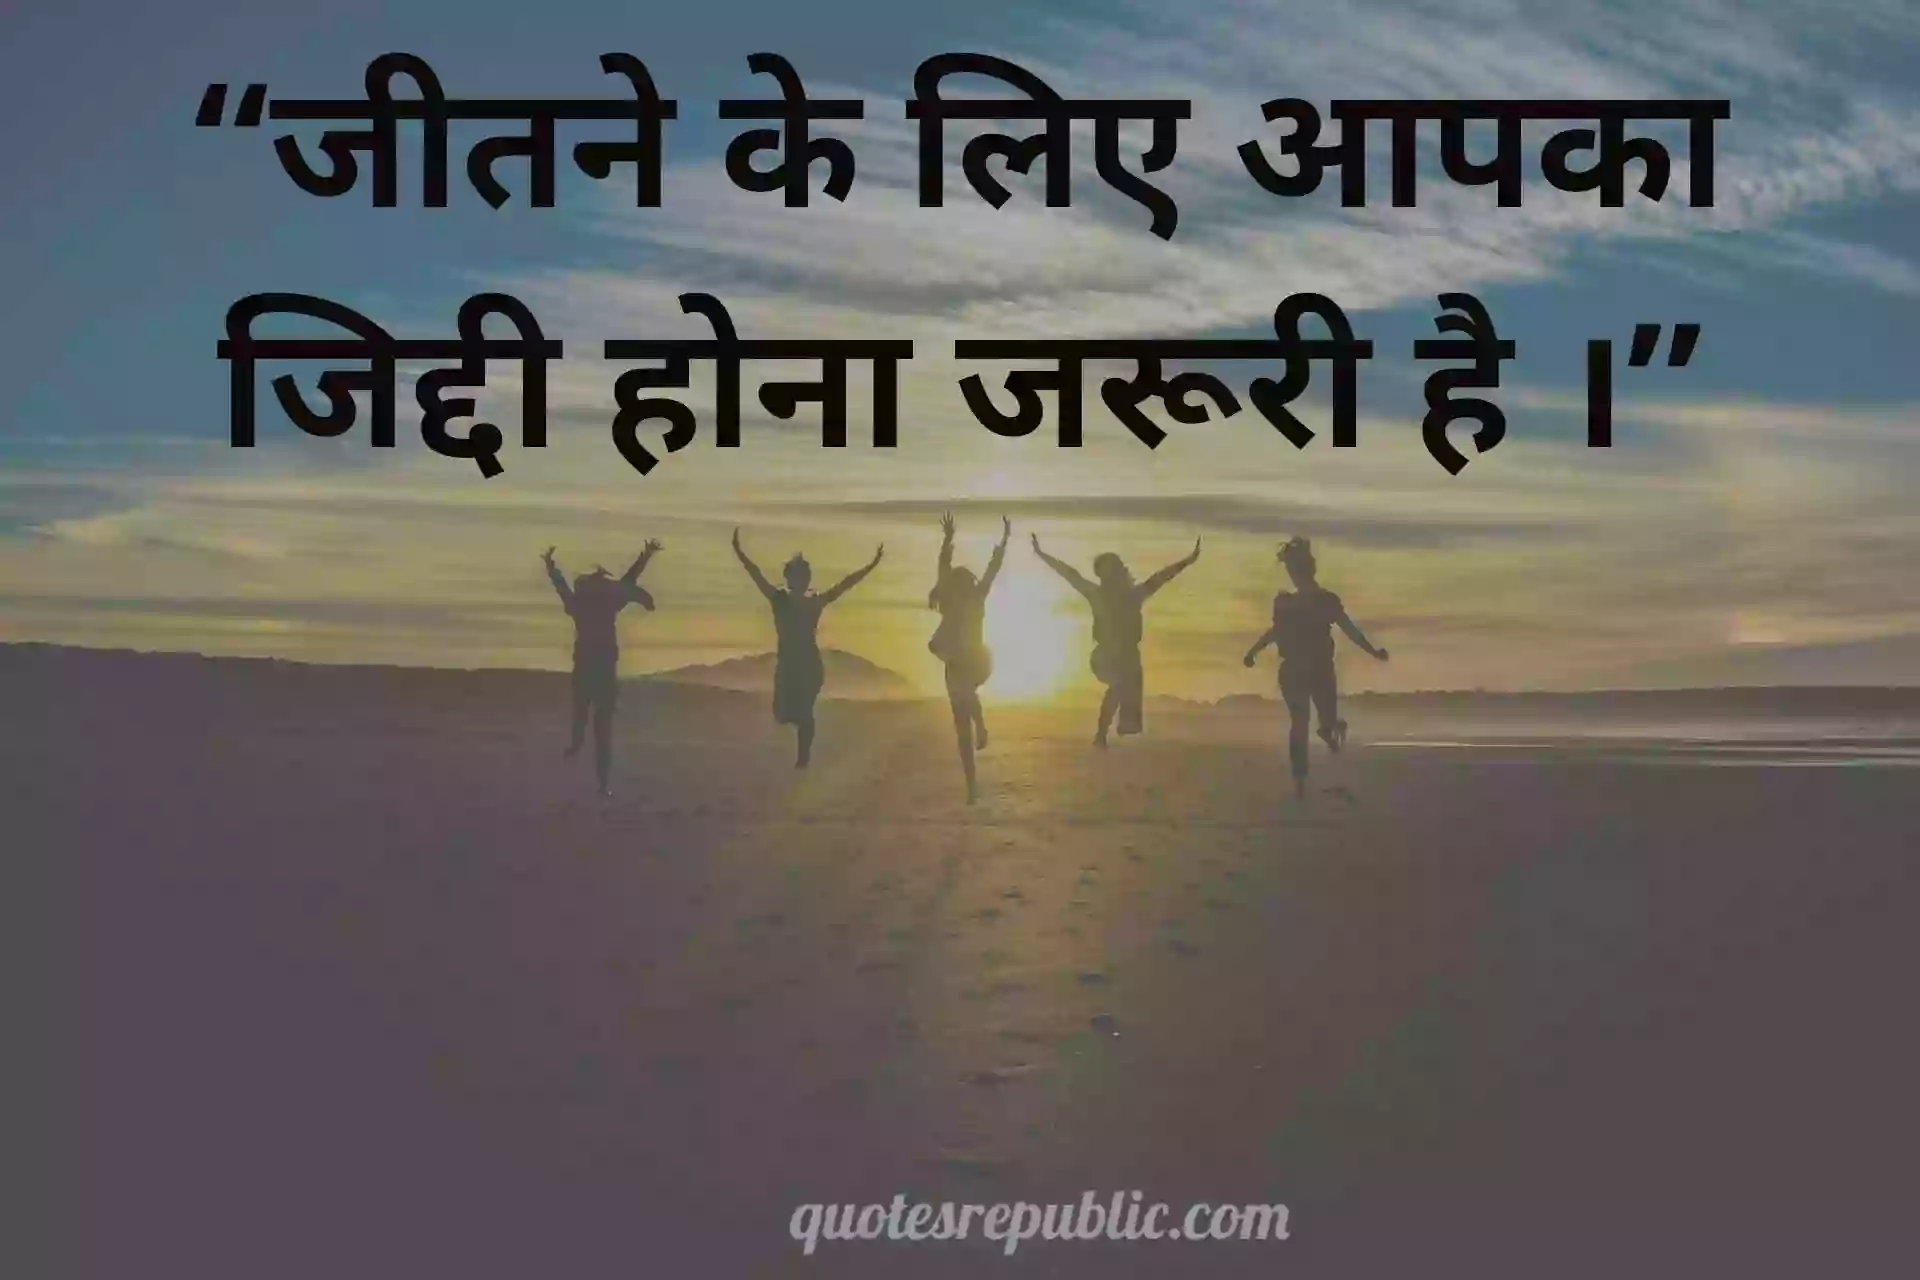 Success Motivation Quotes in Hindi